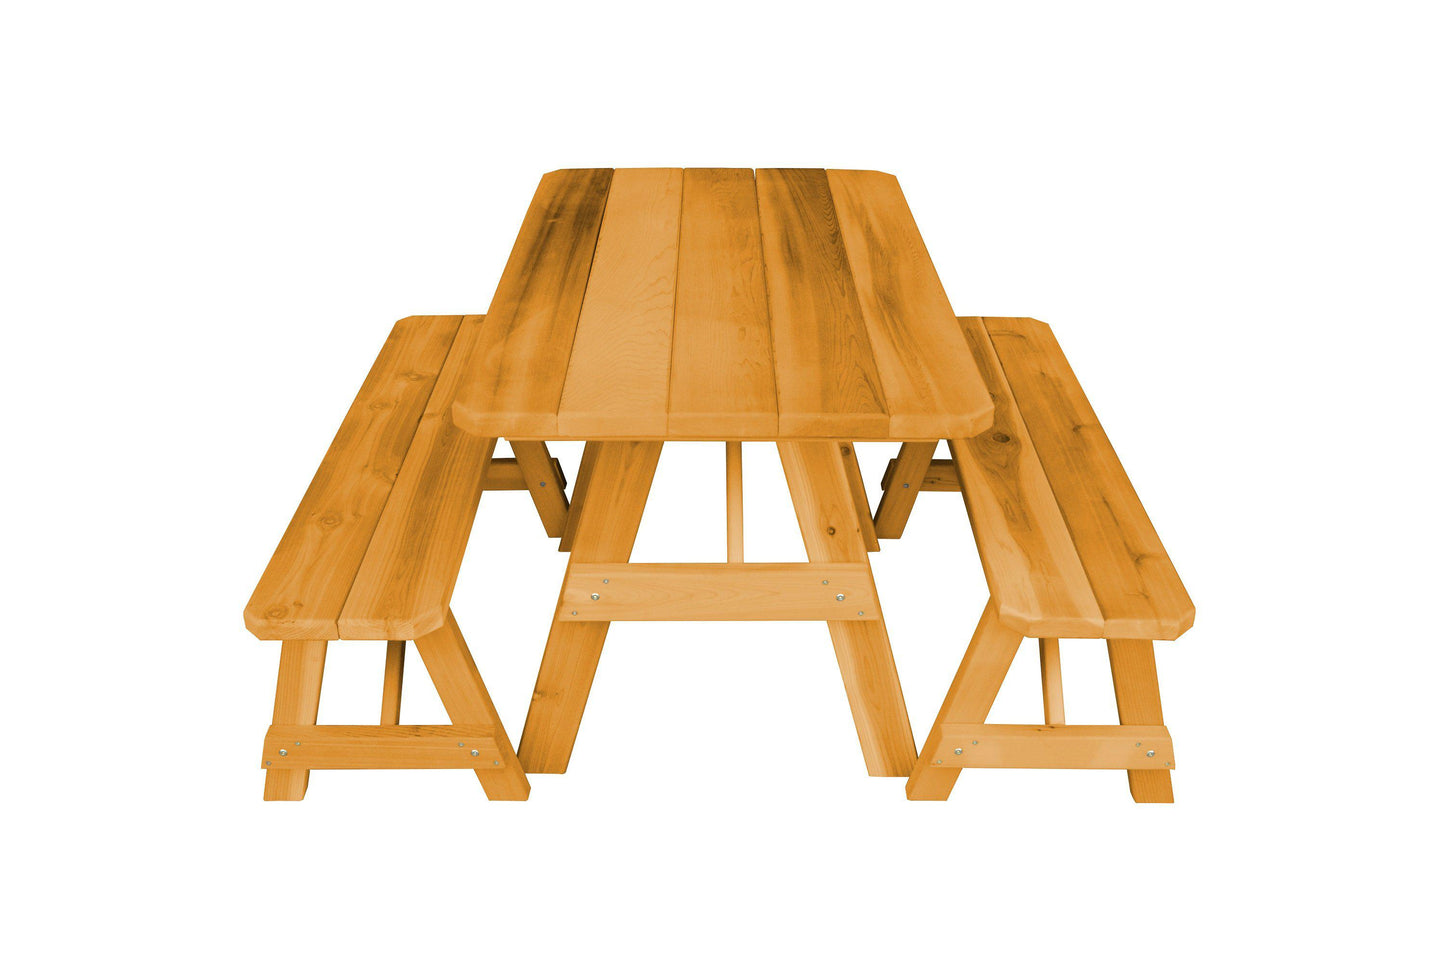 A&L FURNITURE CO.Western Red Cedar 5' Traditional Table w/2 Benches - Specify for FREE 2" Umbrella Hole - LEAD TIME TO SHIP 2 WEEKS